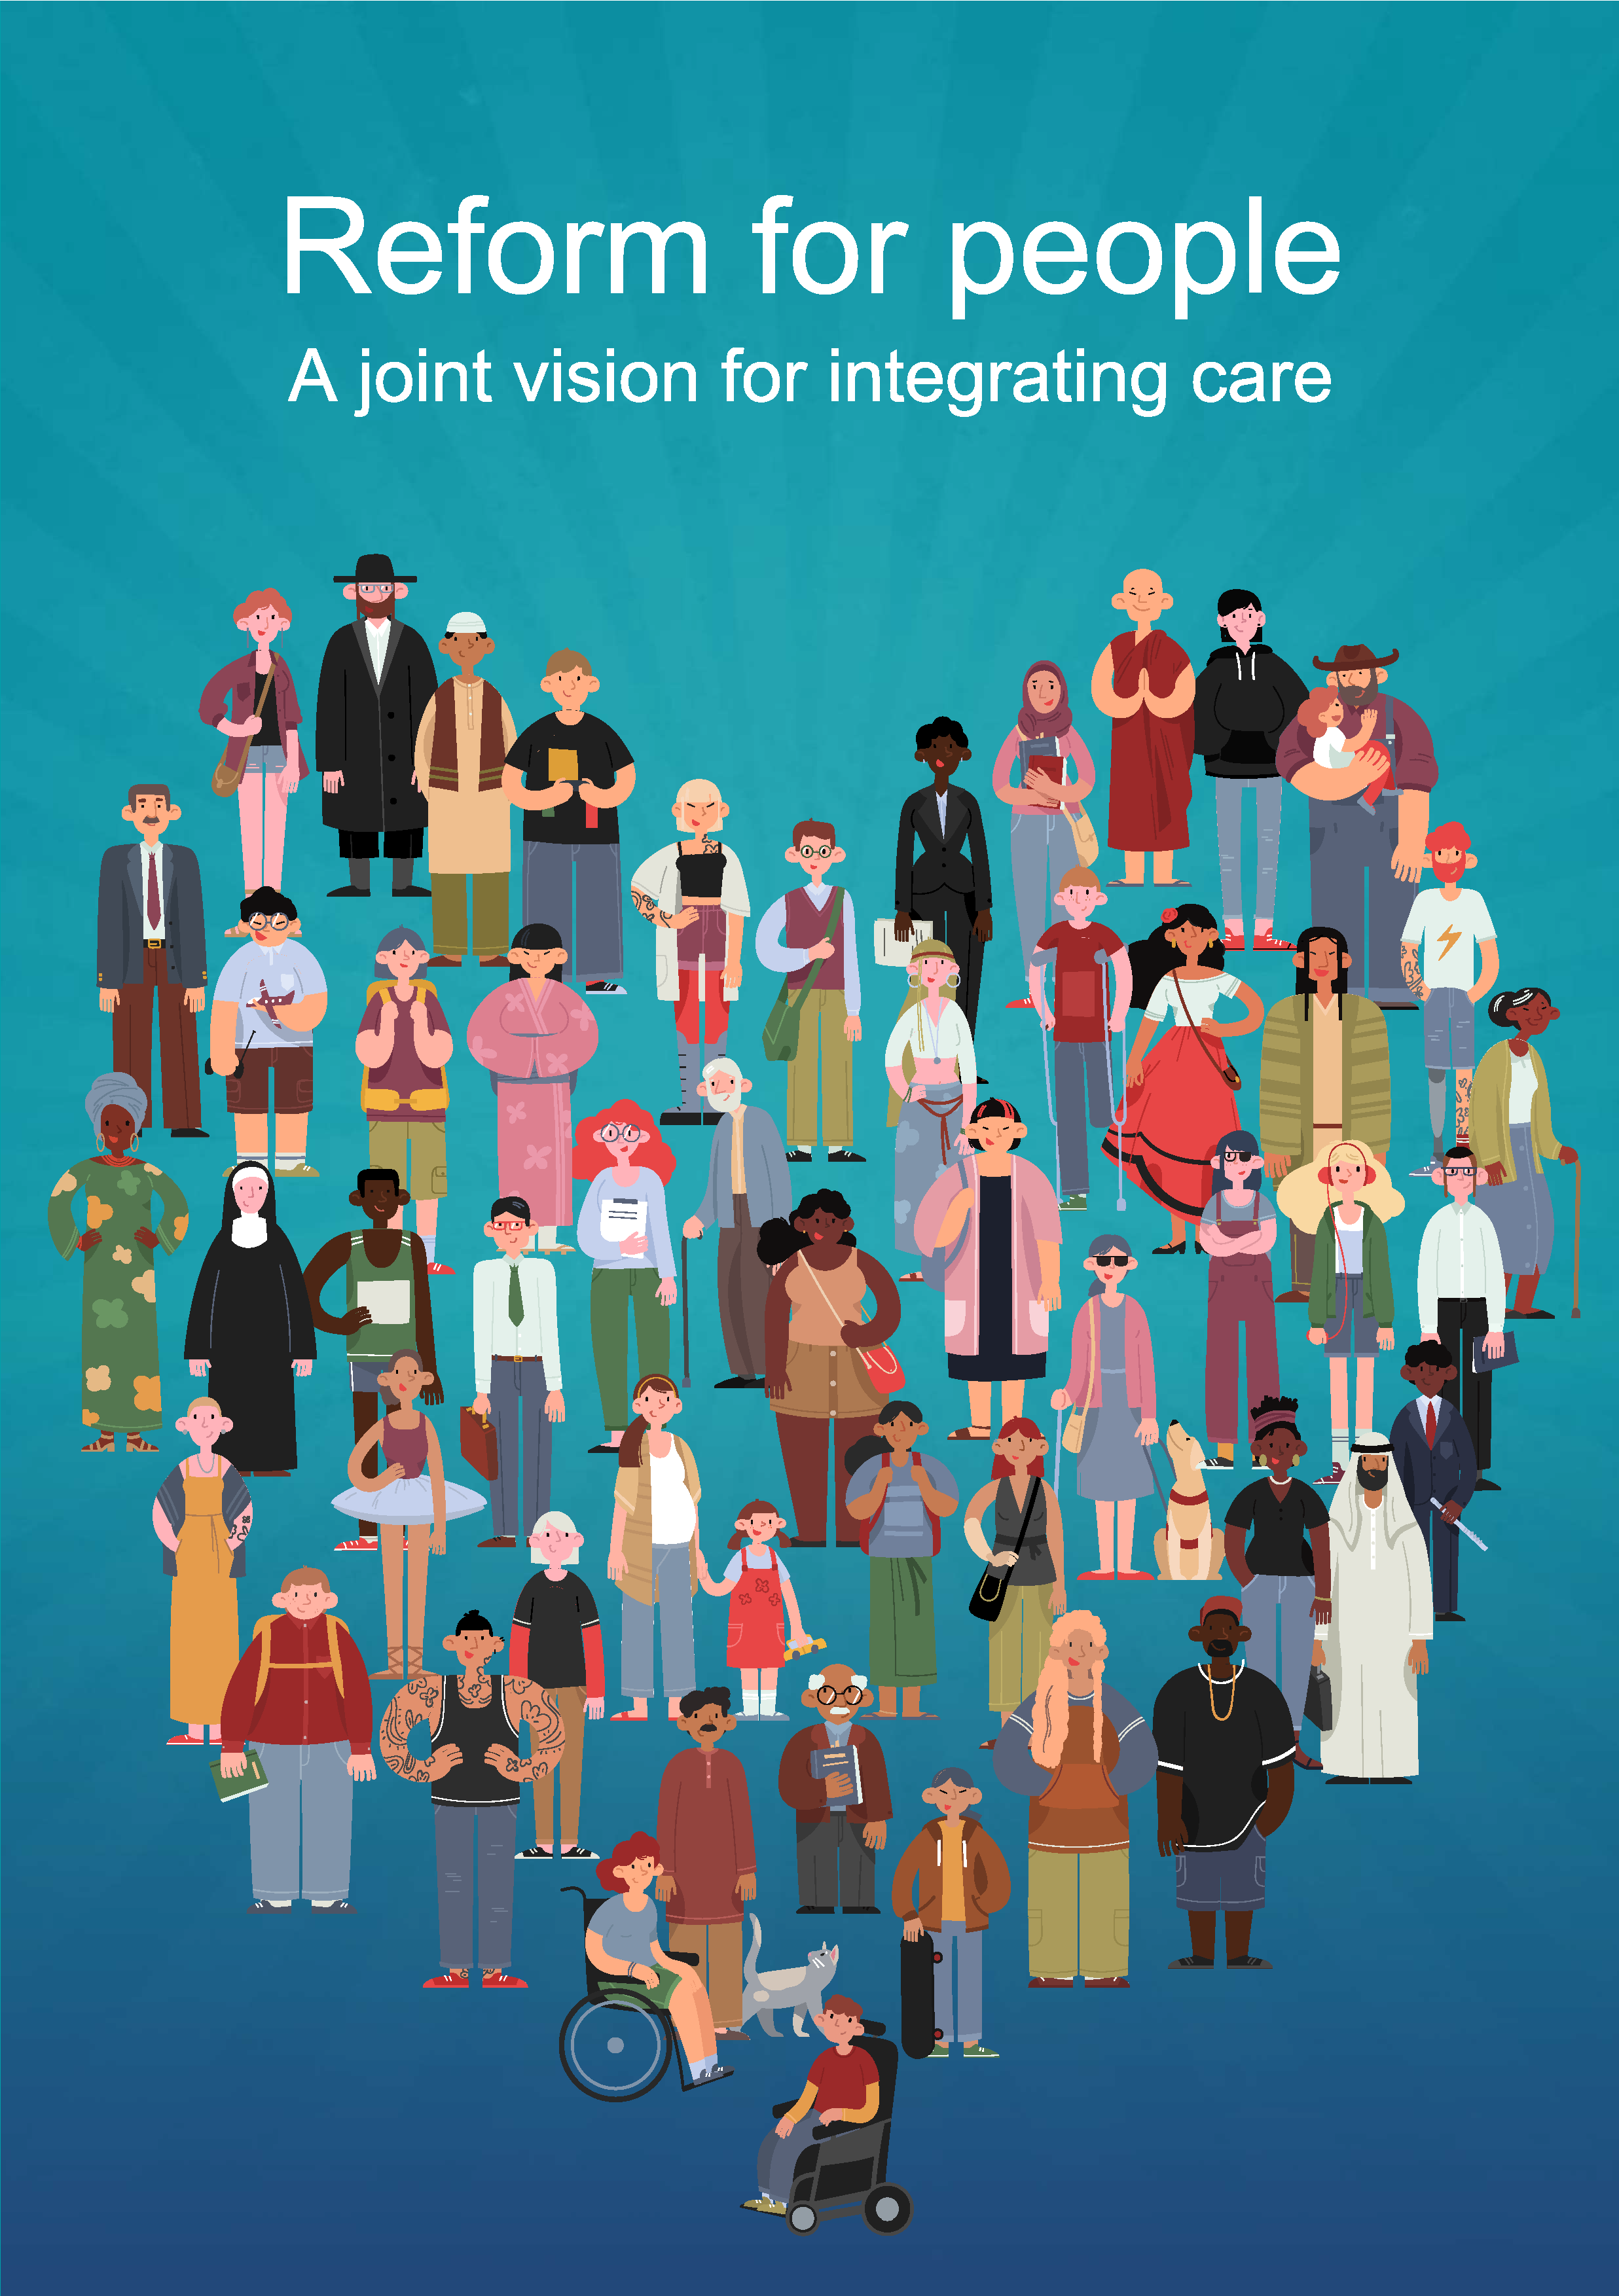 Reform for people: a joint vision for integrating care